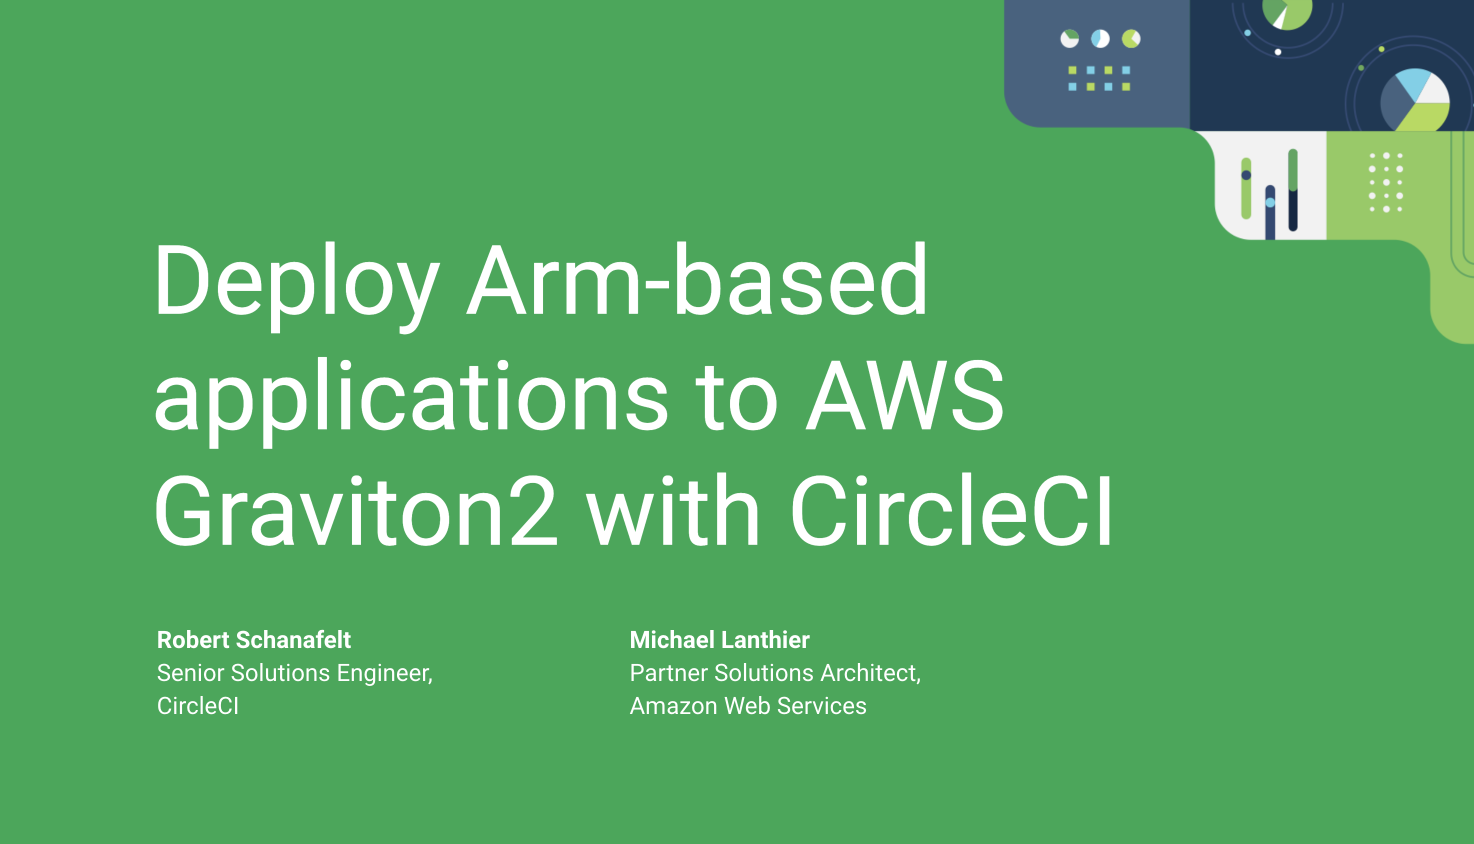 Deploy Arm-based applications to AWS Gravitron2 with CircleCI